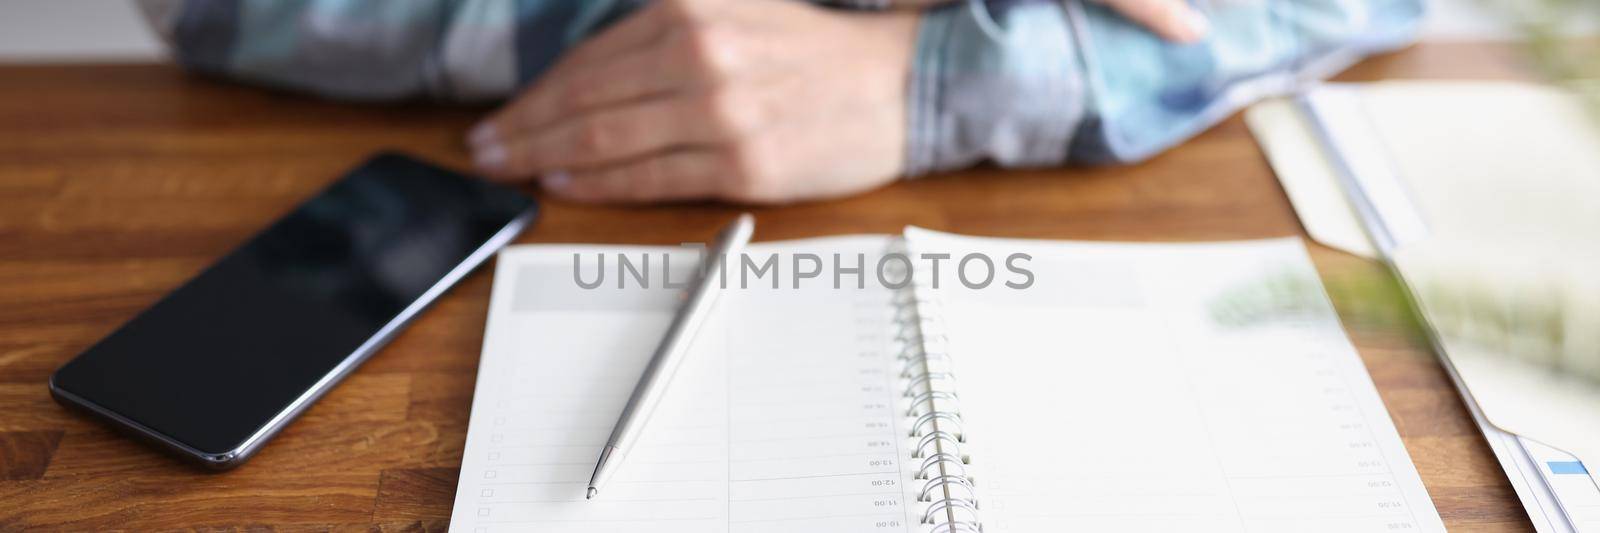 Close-up of open planner on wooden table, person with folded arms. Need to start planning week, meetings, write down thoughts and ideas. Personal diary, creative, journaling concept. Copy space